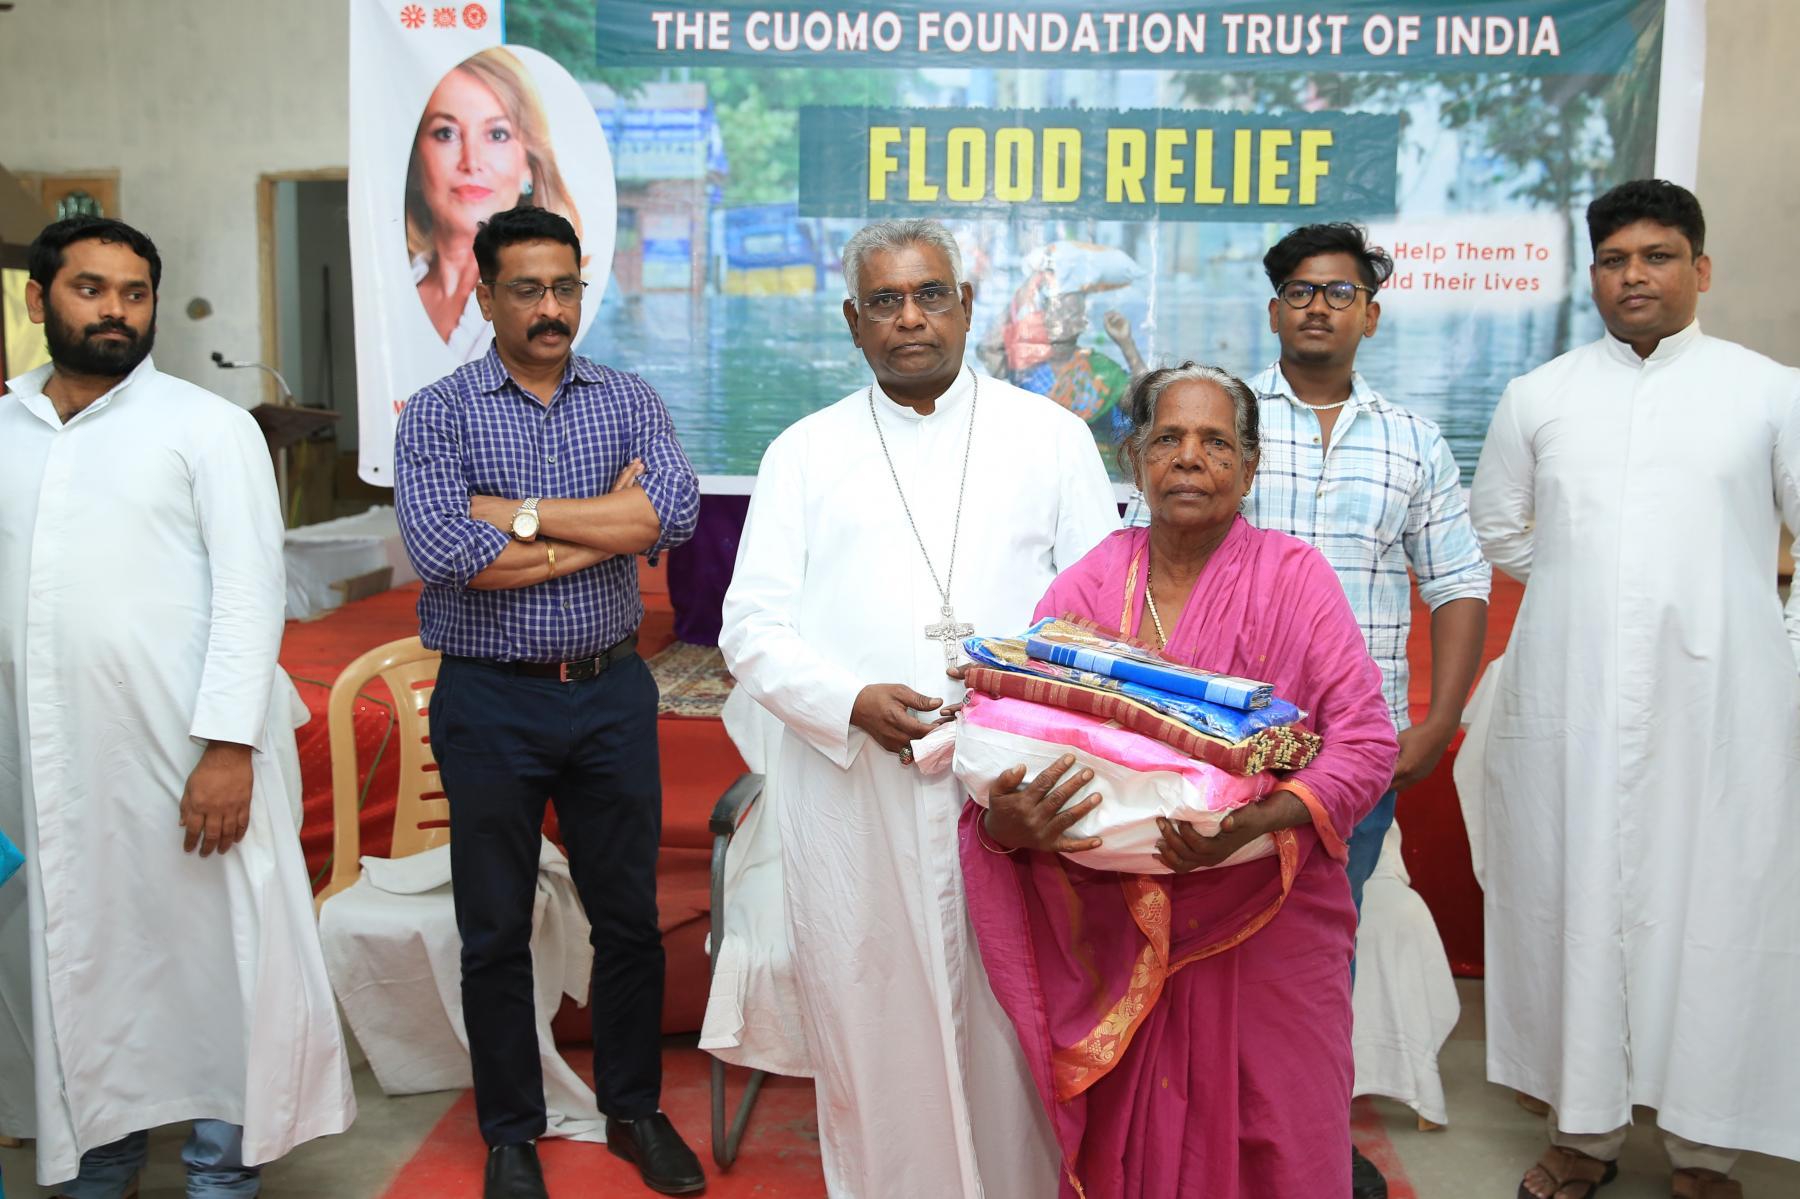 The Cuomo Foundation provides aid for victims of cyclone Michaung in India